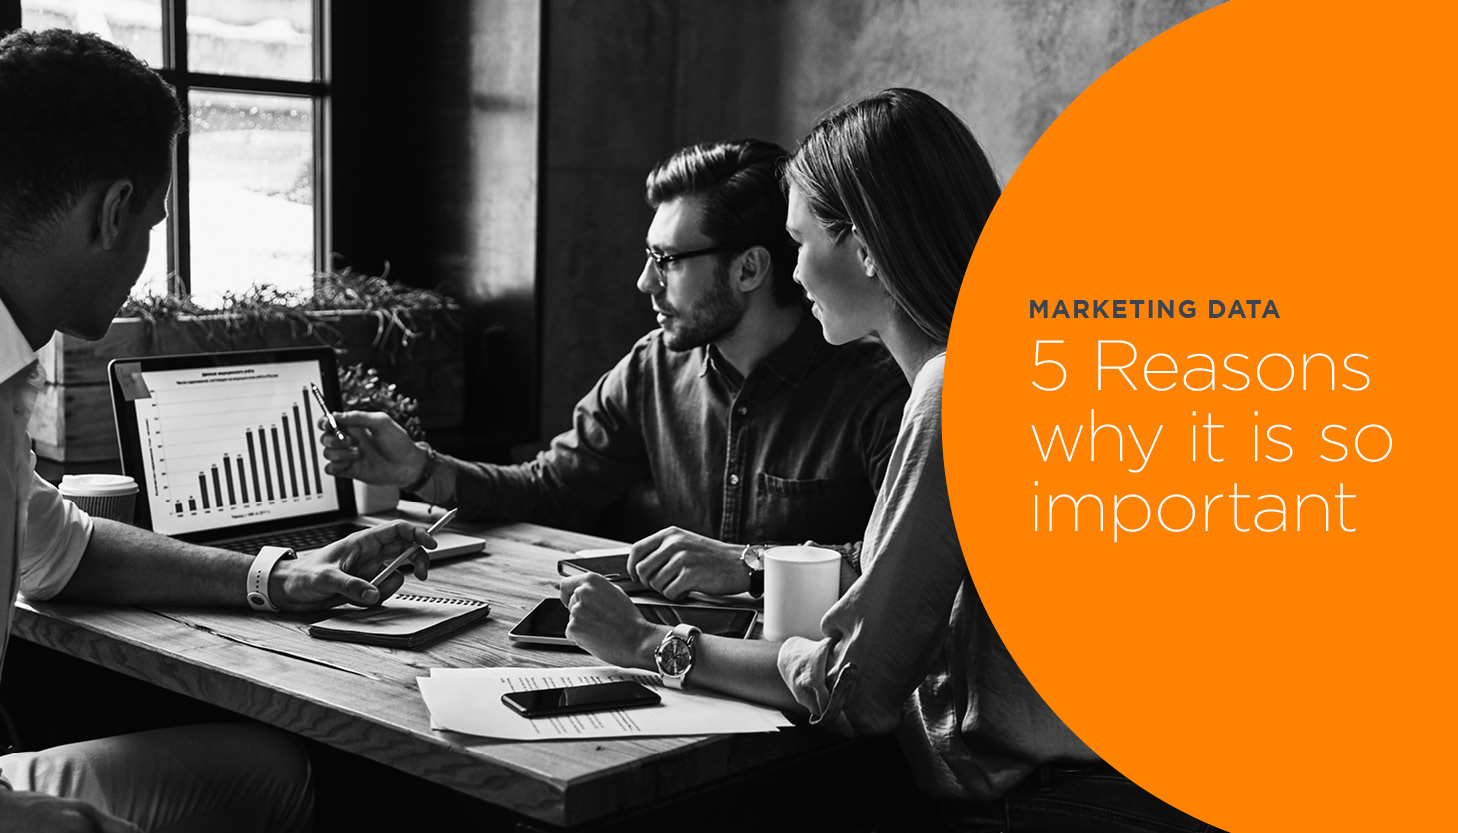 5 reasons why marketing data is so important – B2Bs and NFPs listen up!